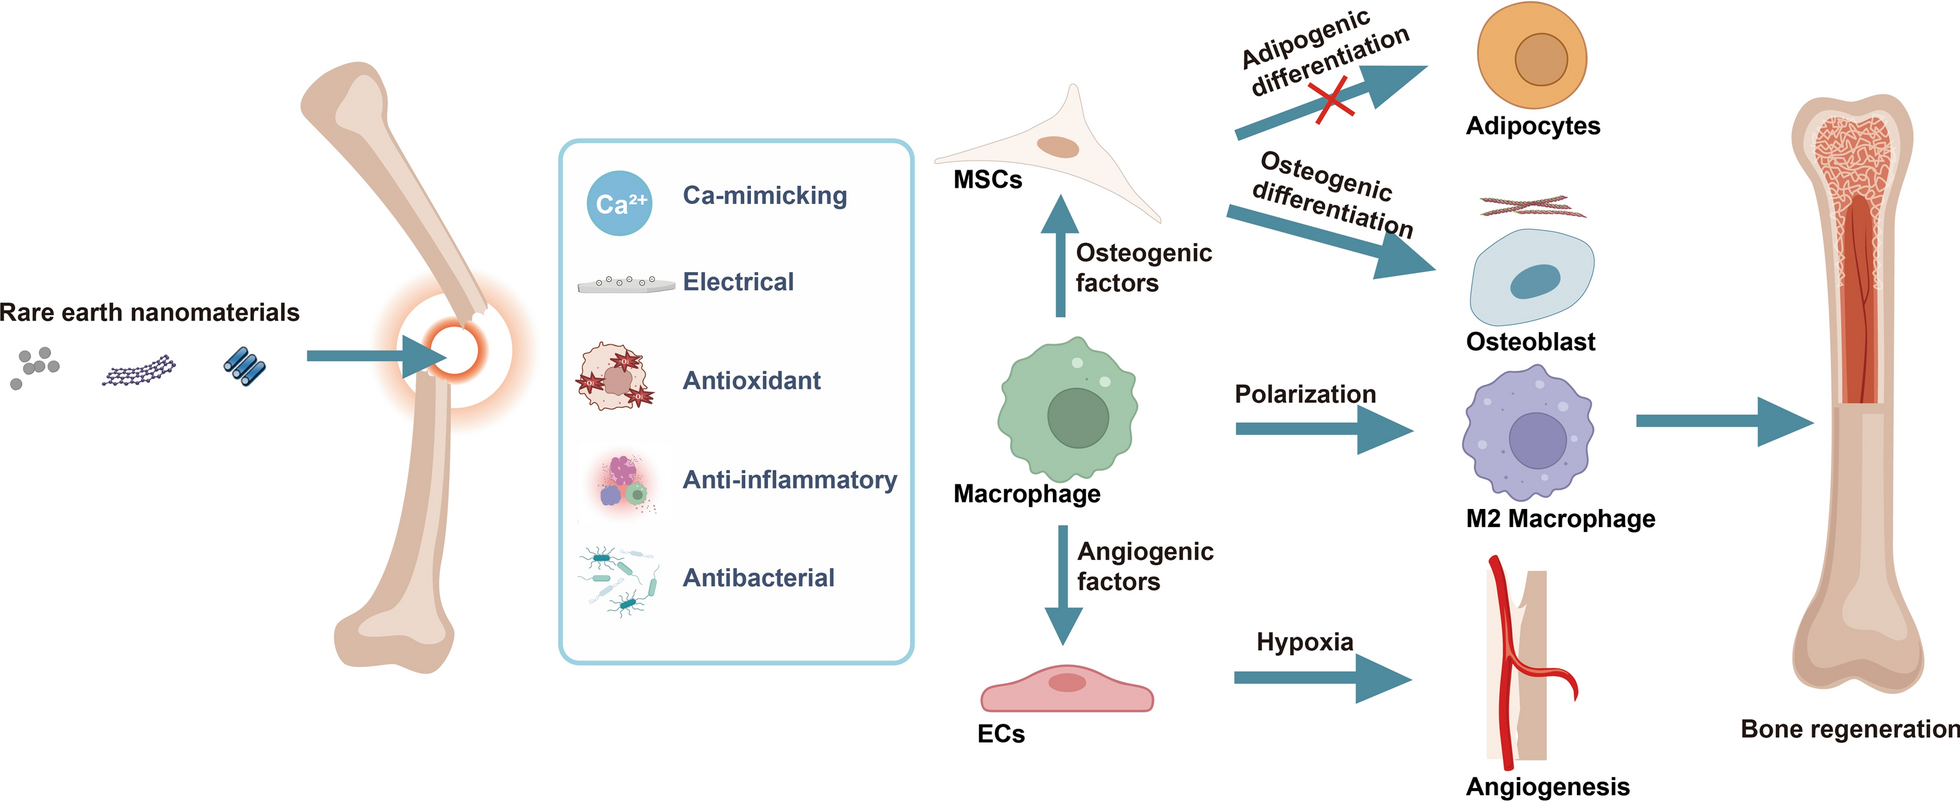 Systematic review of the osteogenic effect of rare earth nanomaterials and the underlying mechanisms